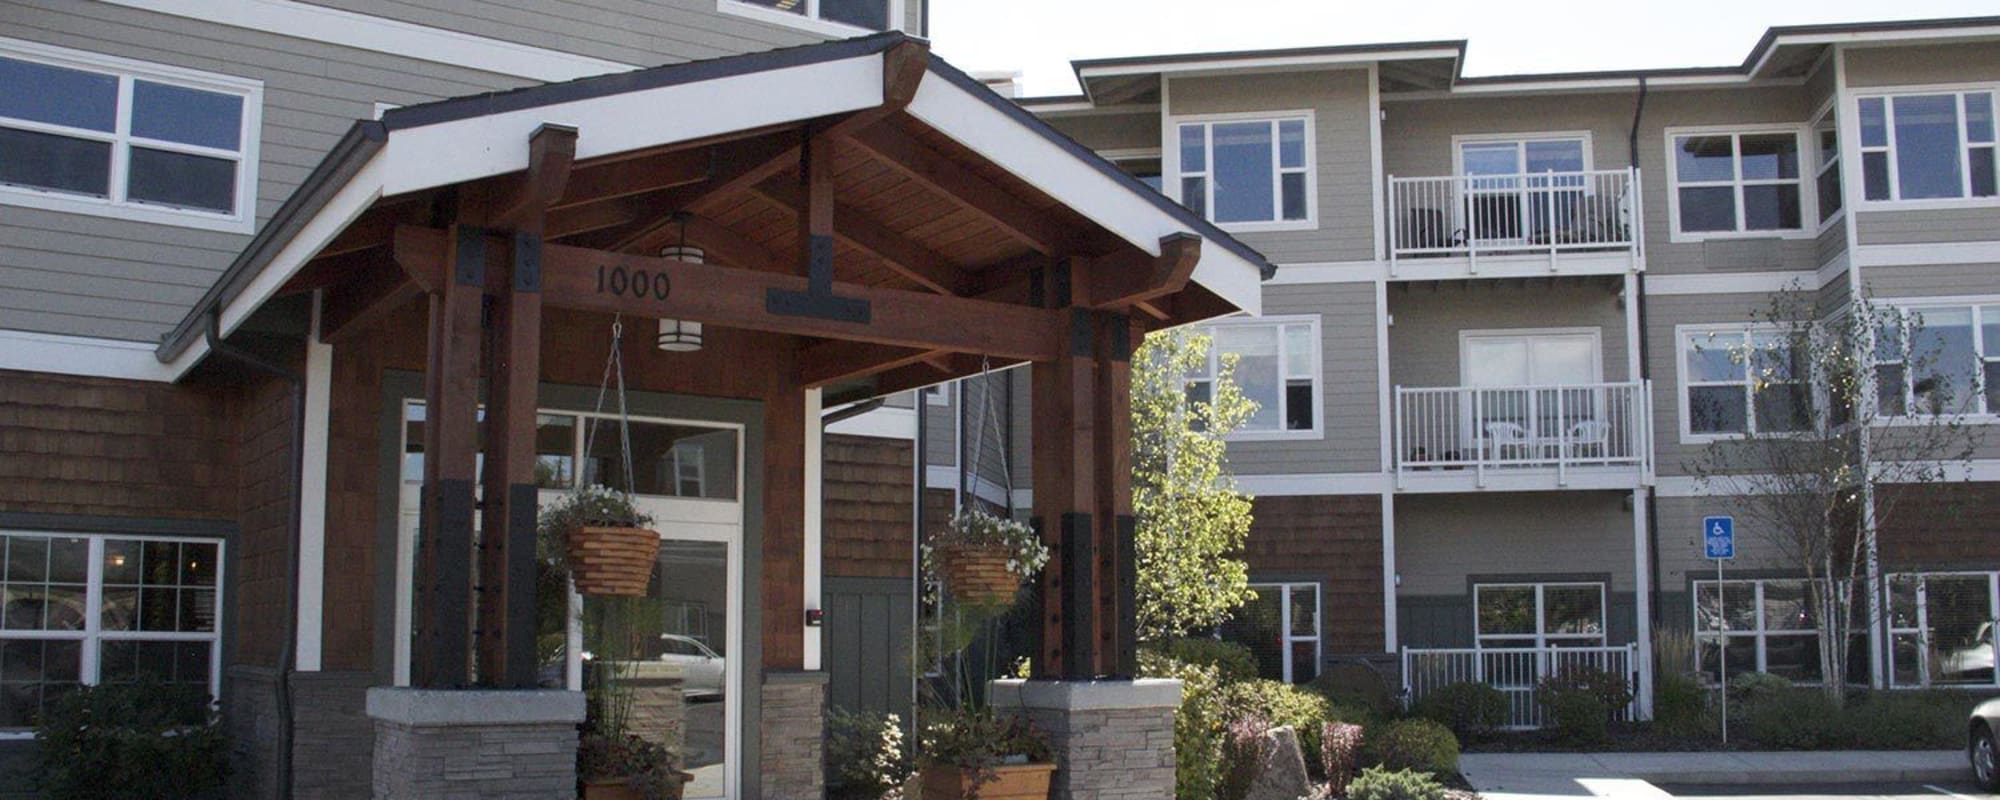 Elegant front entrnace of upscale senior living facility at The Springs at Mill Creek in The Dalles, Oregon